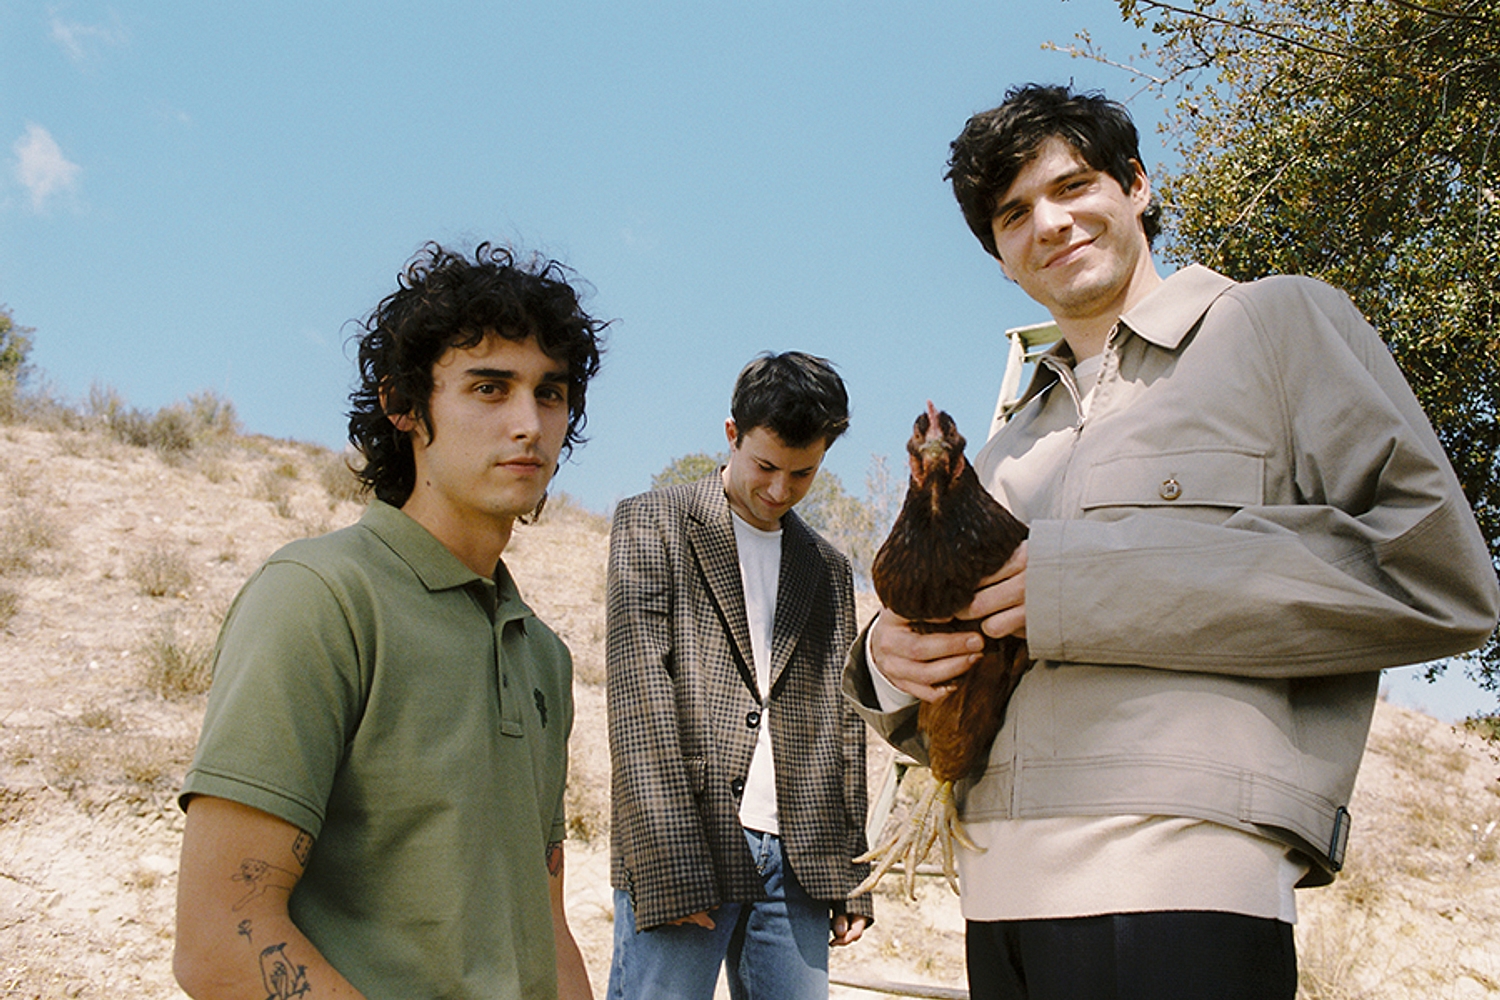 Wallows announce new album ‘Tell Me That It’s Over’